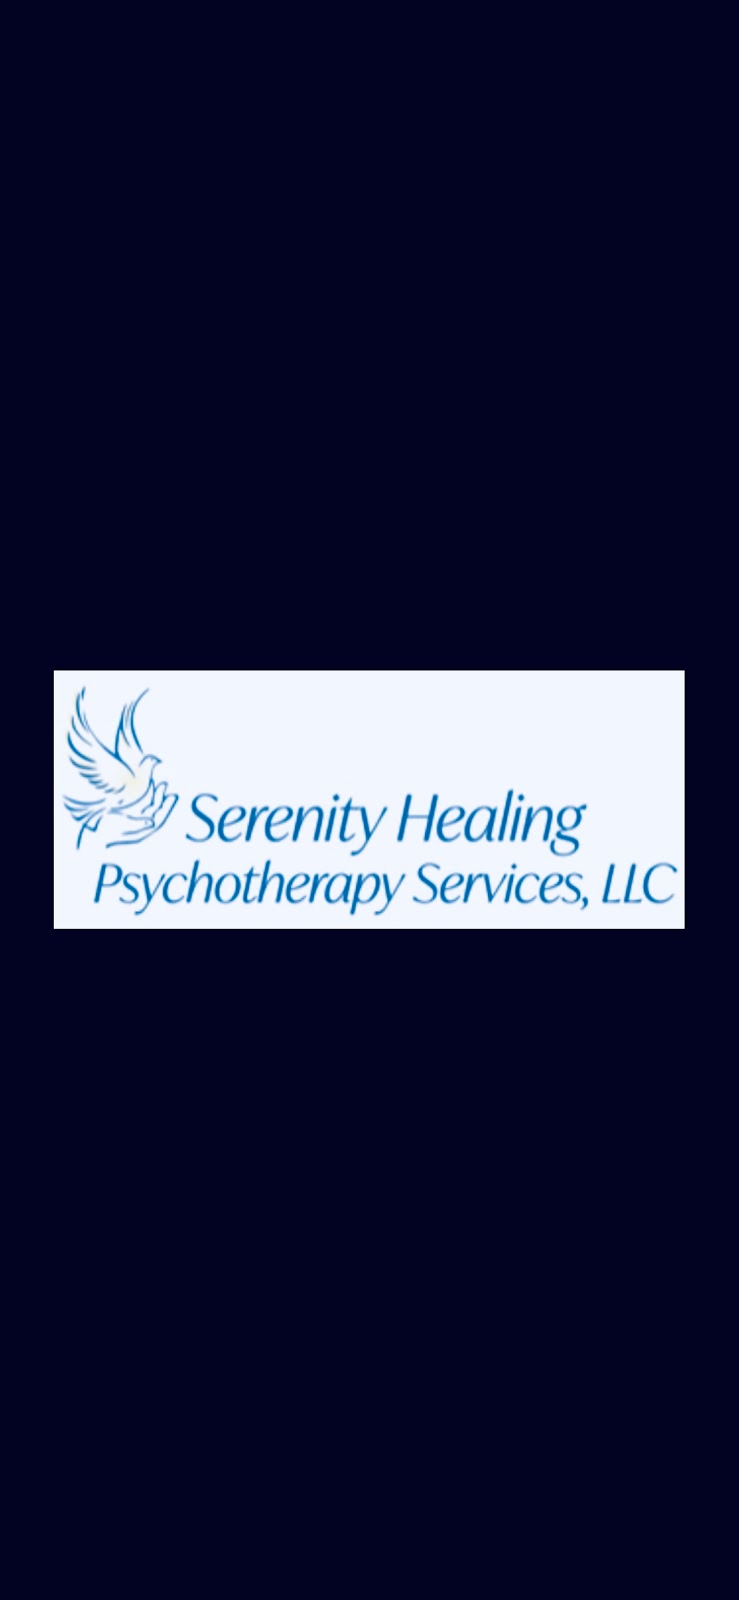 Serenity Healing Psychotherapy Services, LLC | 939 Ridge Rd #2c, Monmouth Junction, NJ 08852 | Phone: (609) 921-4490